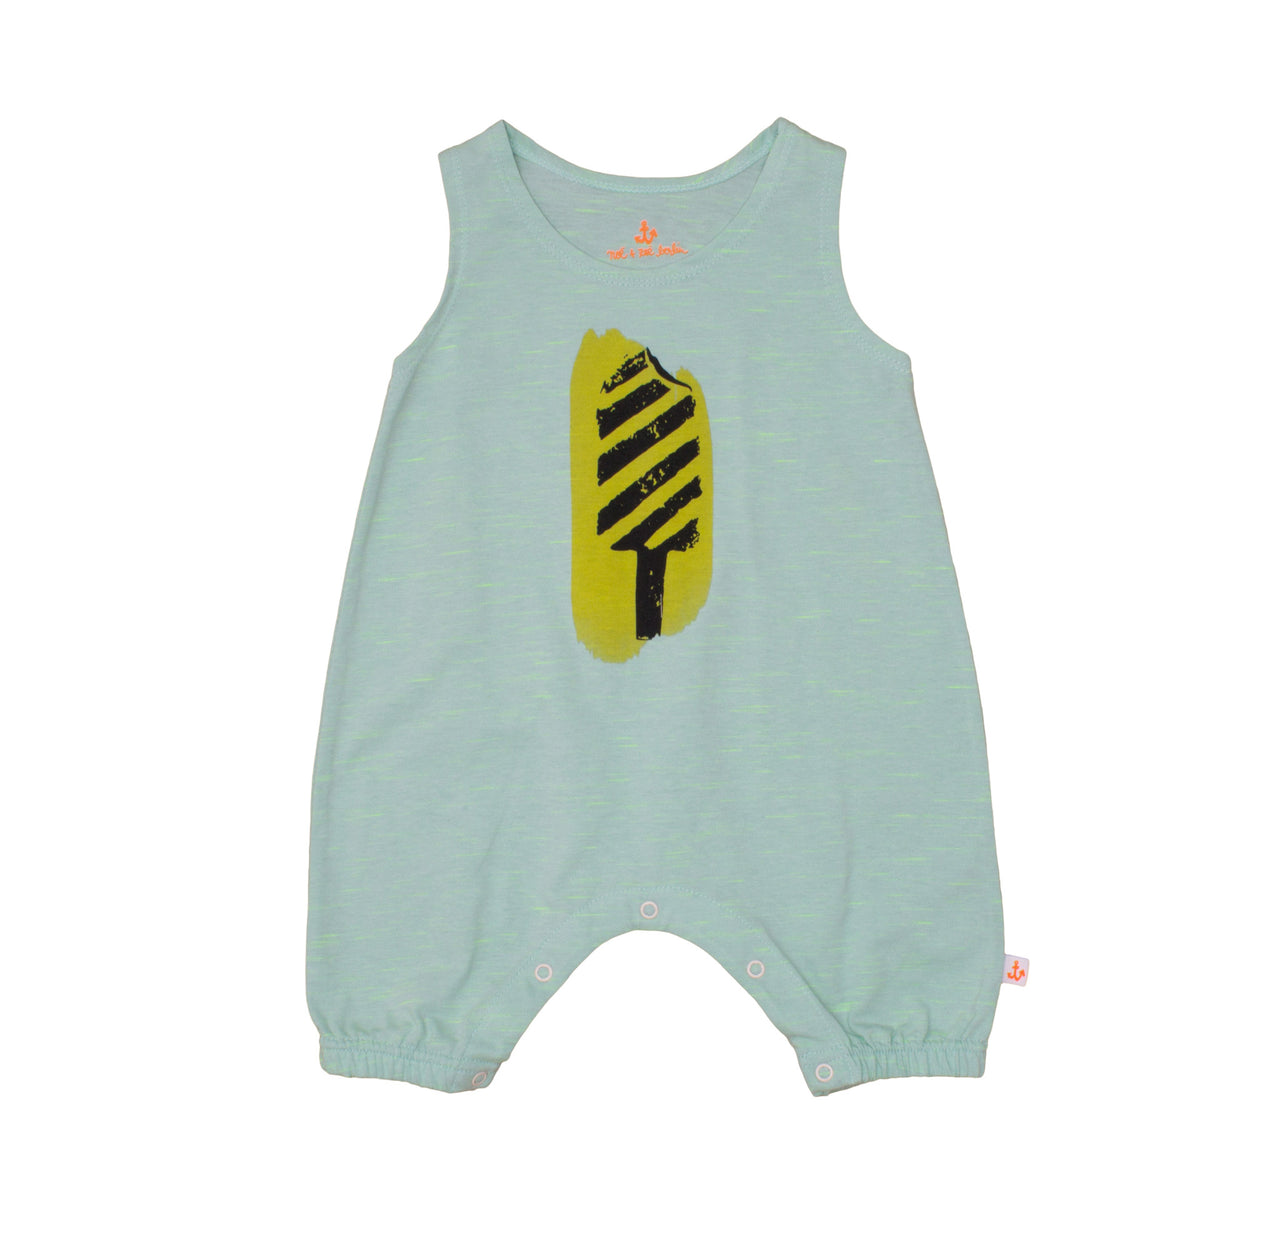 Baby Tank Overall, Mint with Yellow Ice Cream